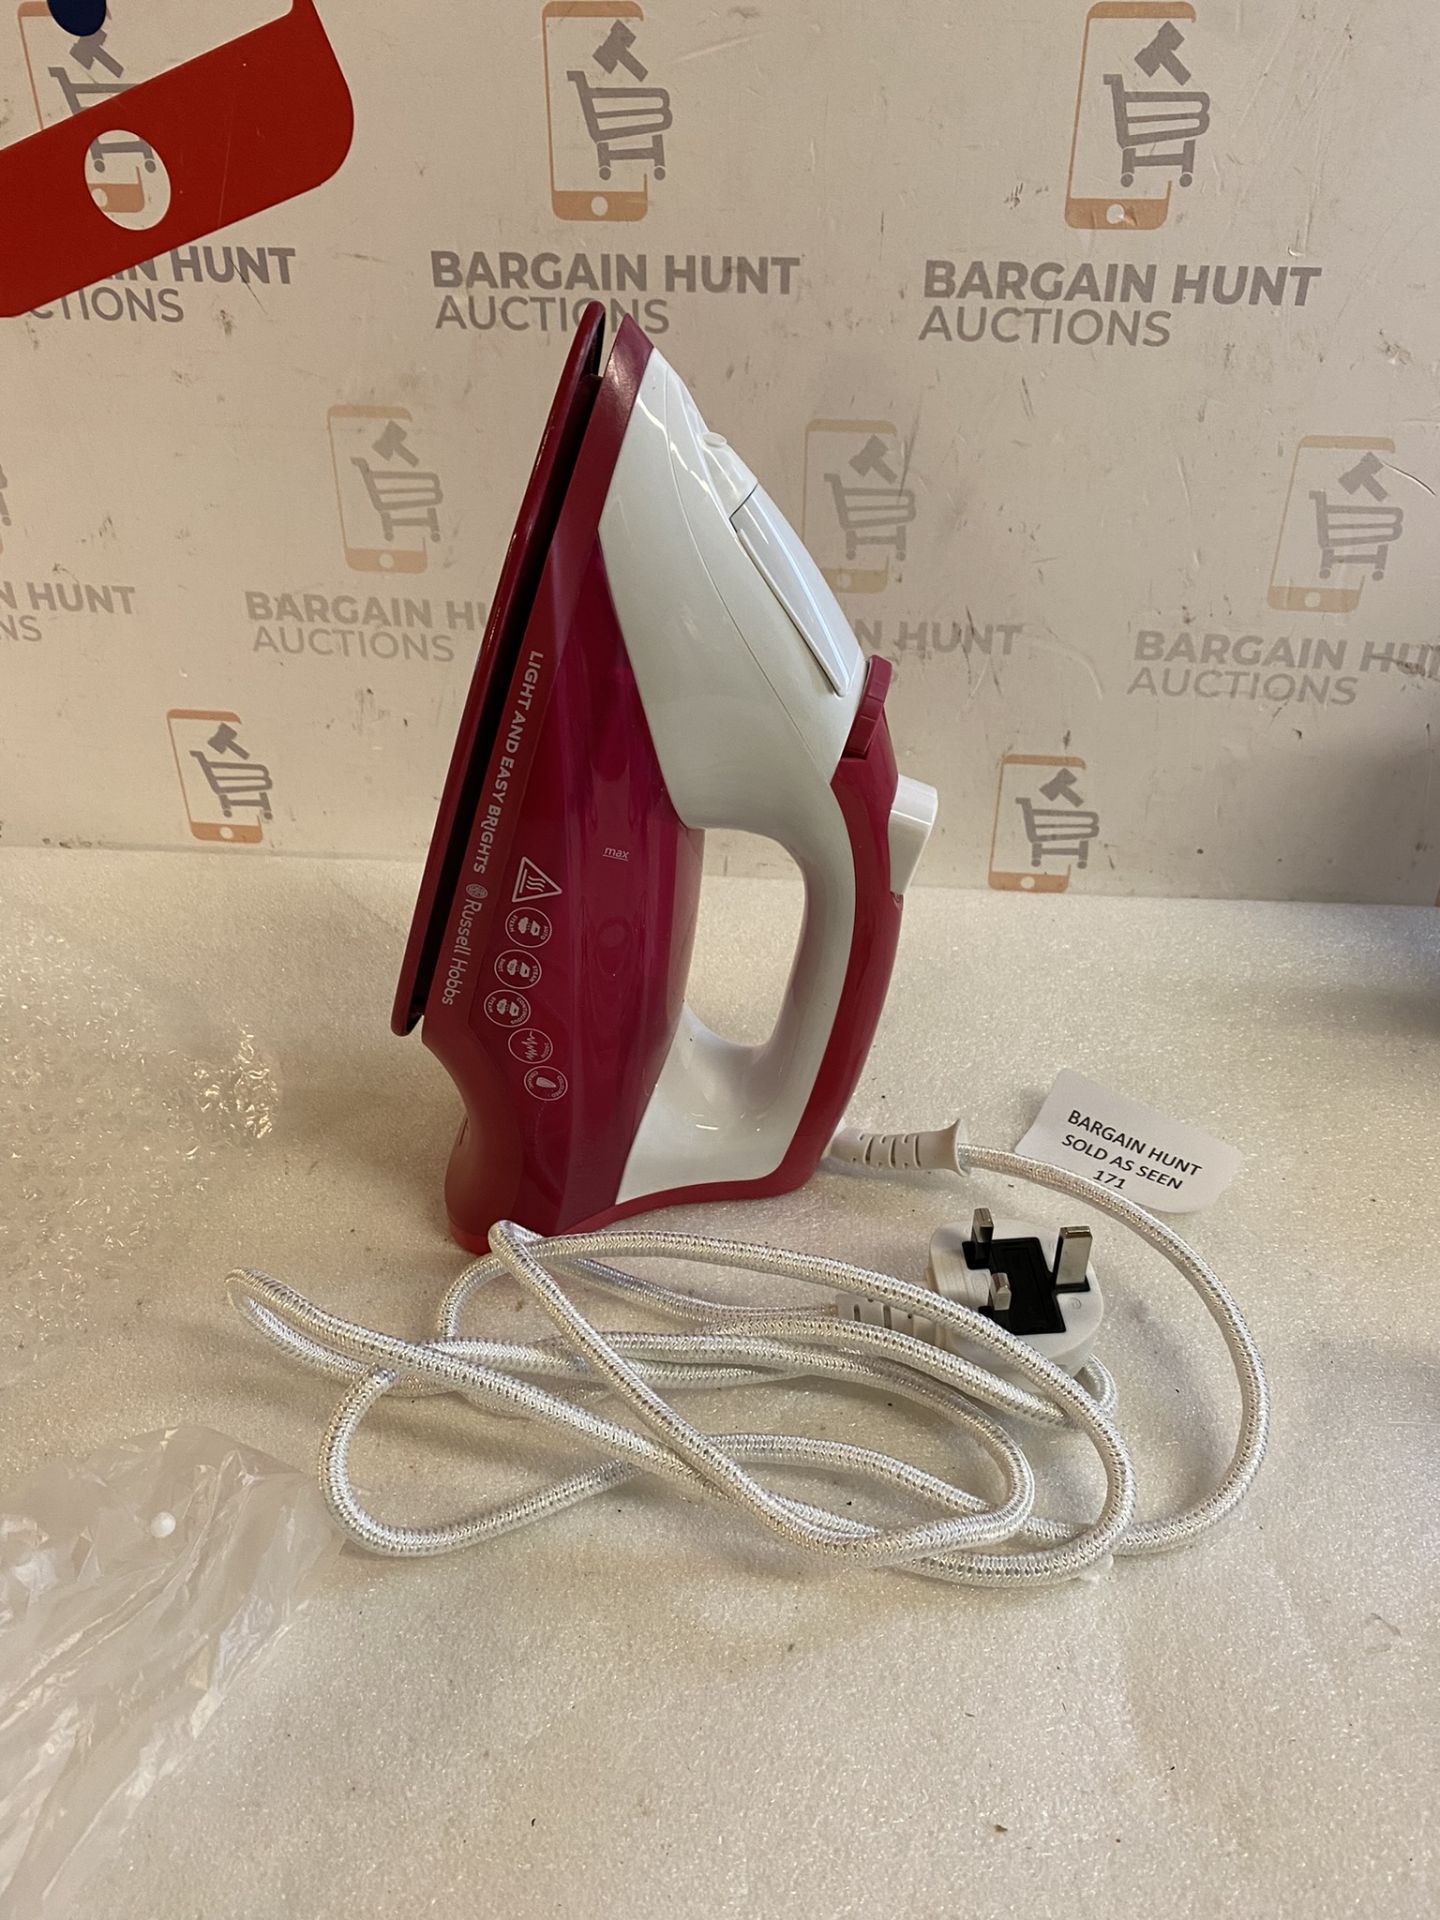 Russell Hobbs 26480 Light and Easy Brights Steam Iron RRP £23.99